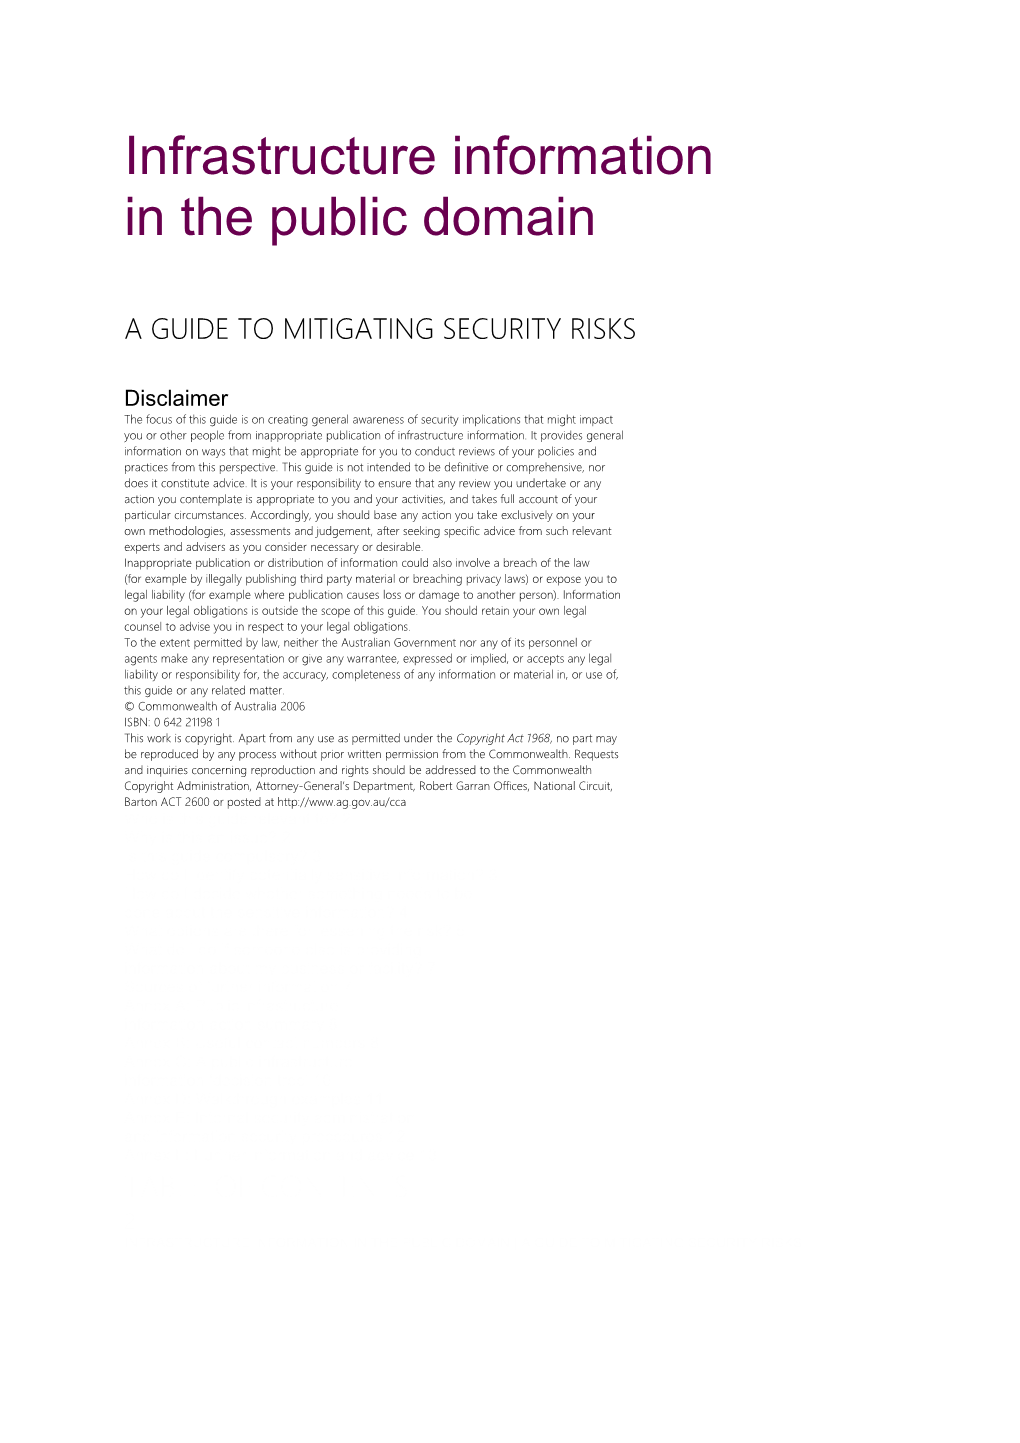 Infrastructure Information in the Public Domain DOC 86KB